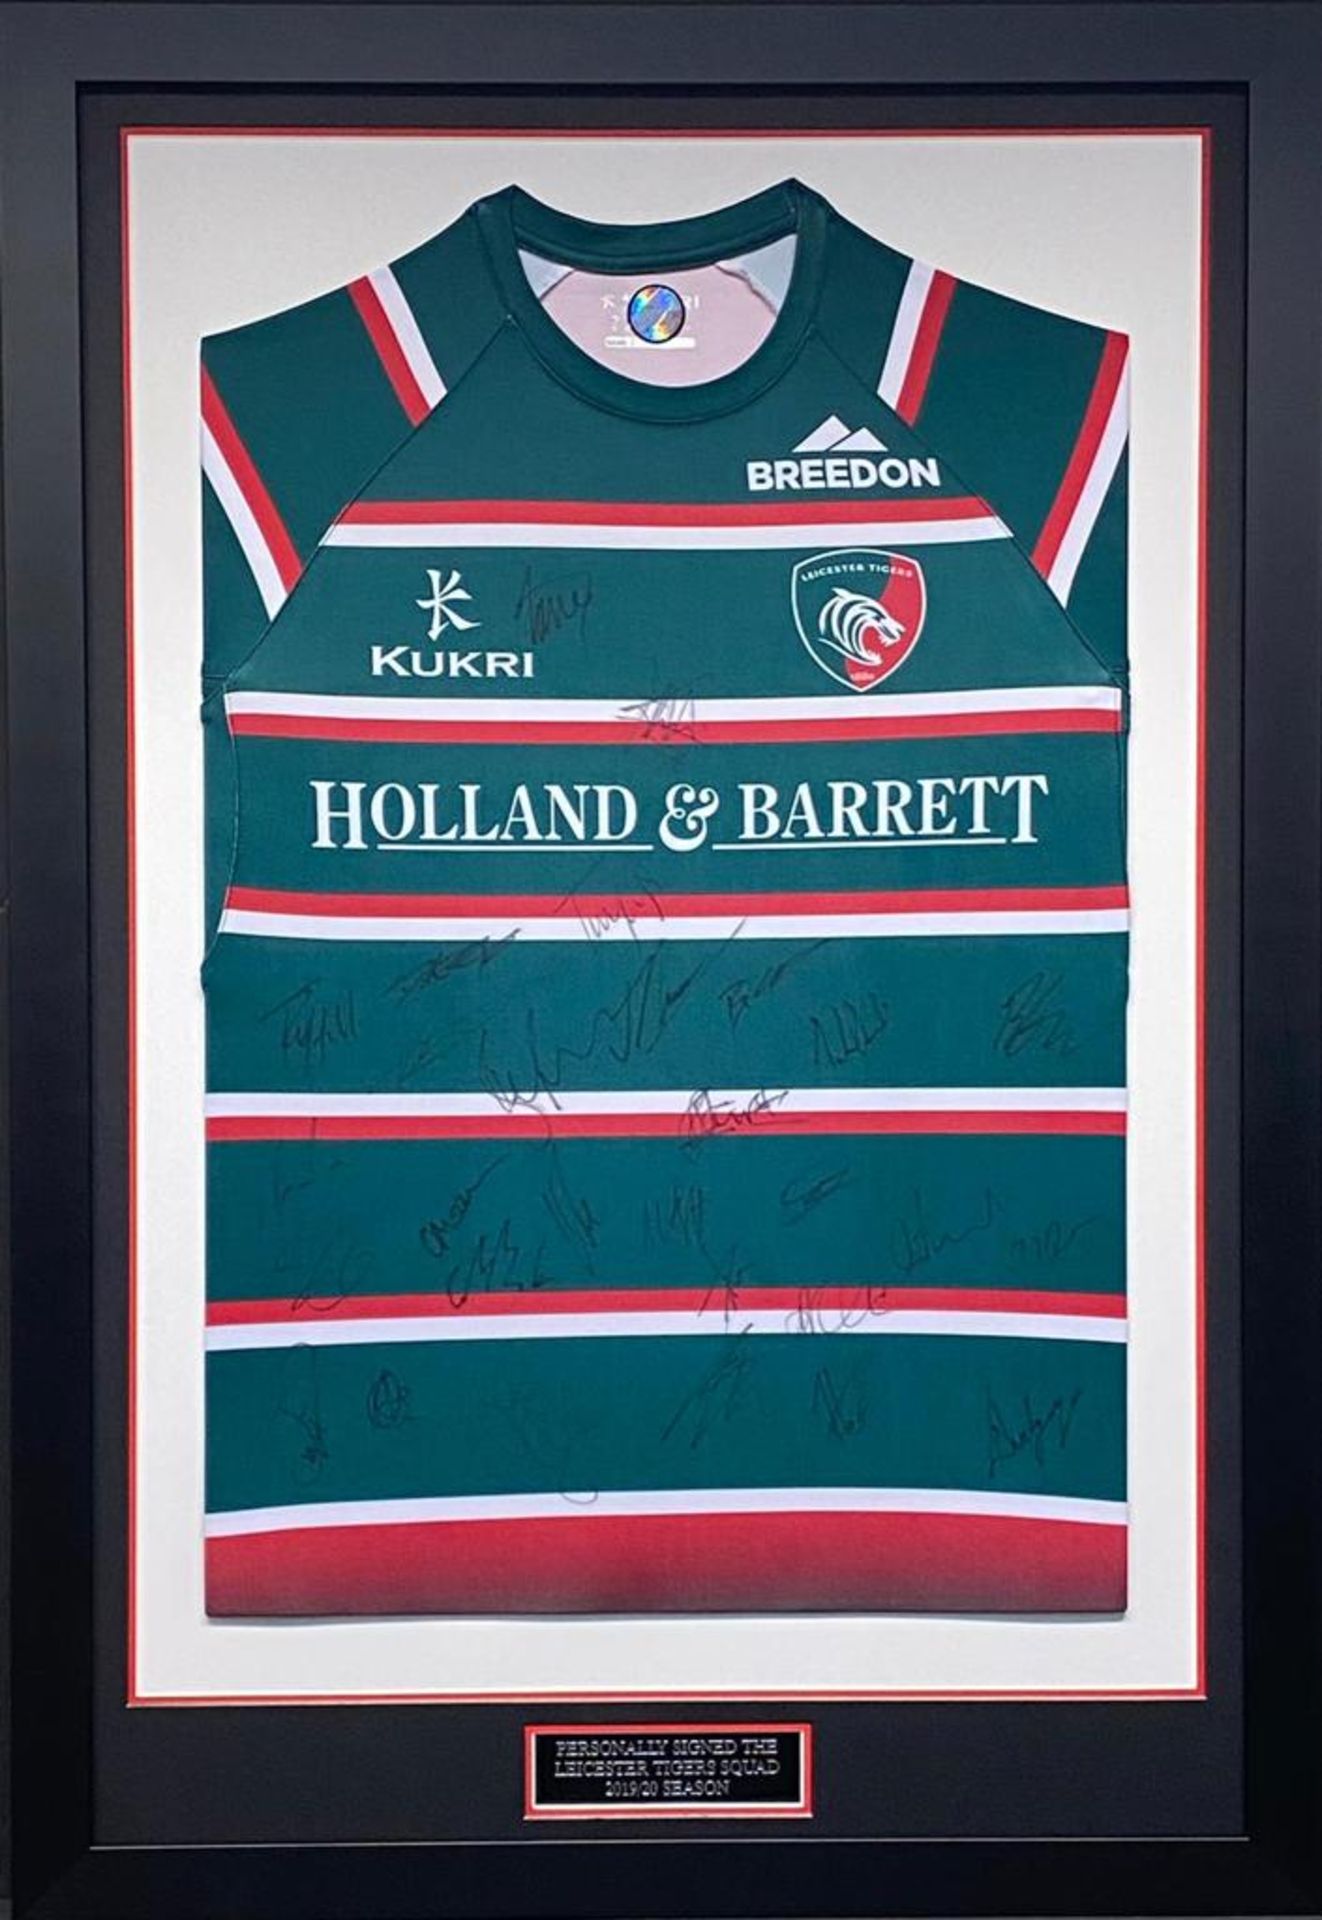 Leicester Tigers Framed Squad Signed 19/20 Rugby Shirt Supplied with Certificate Of Authenticity